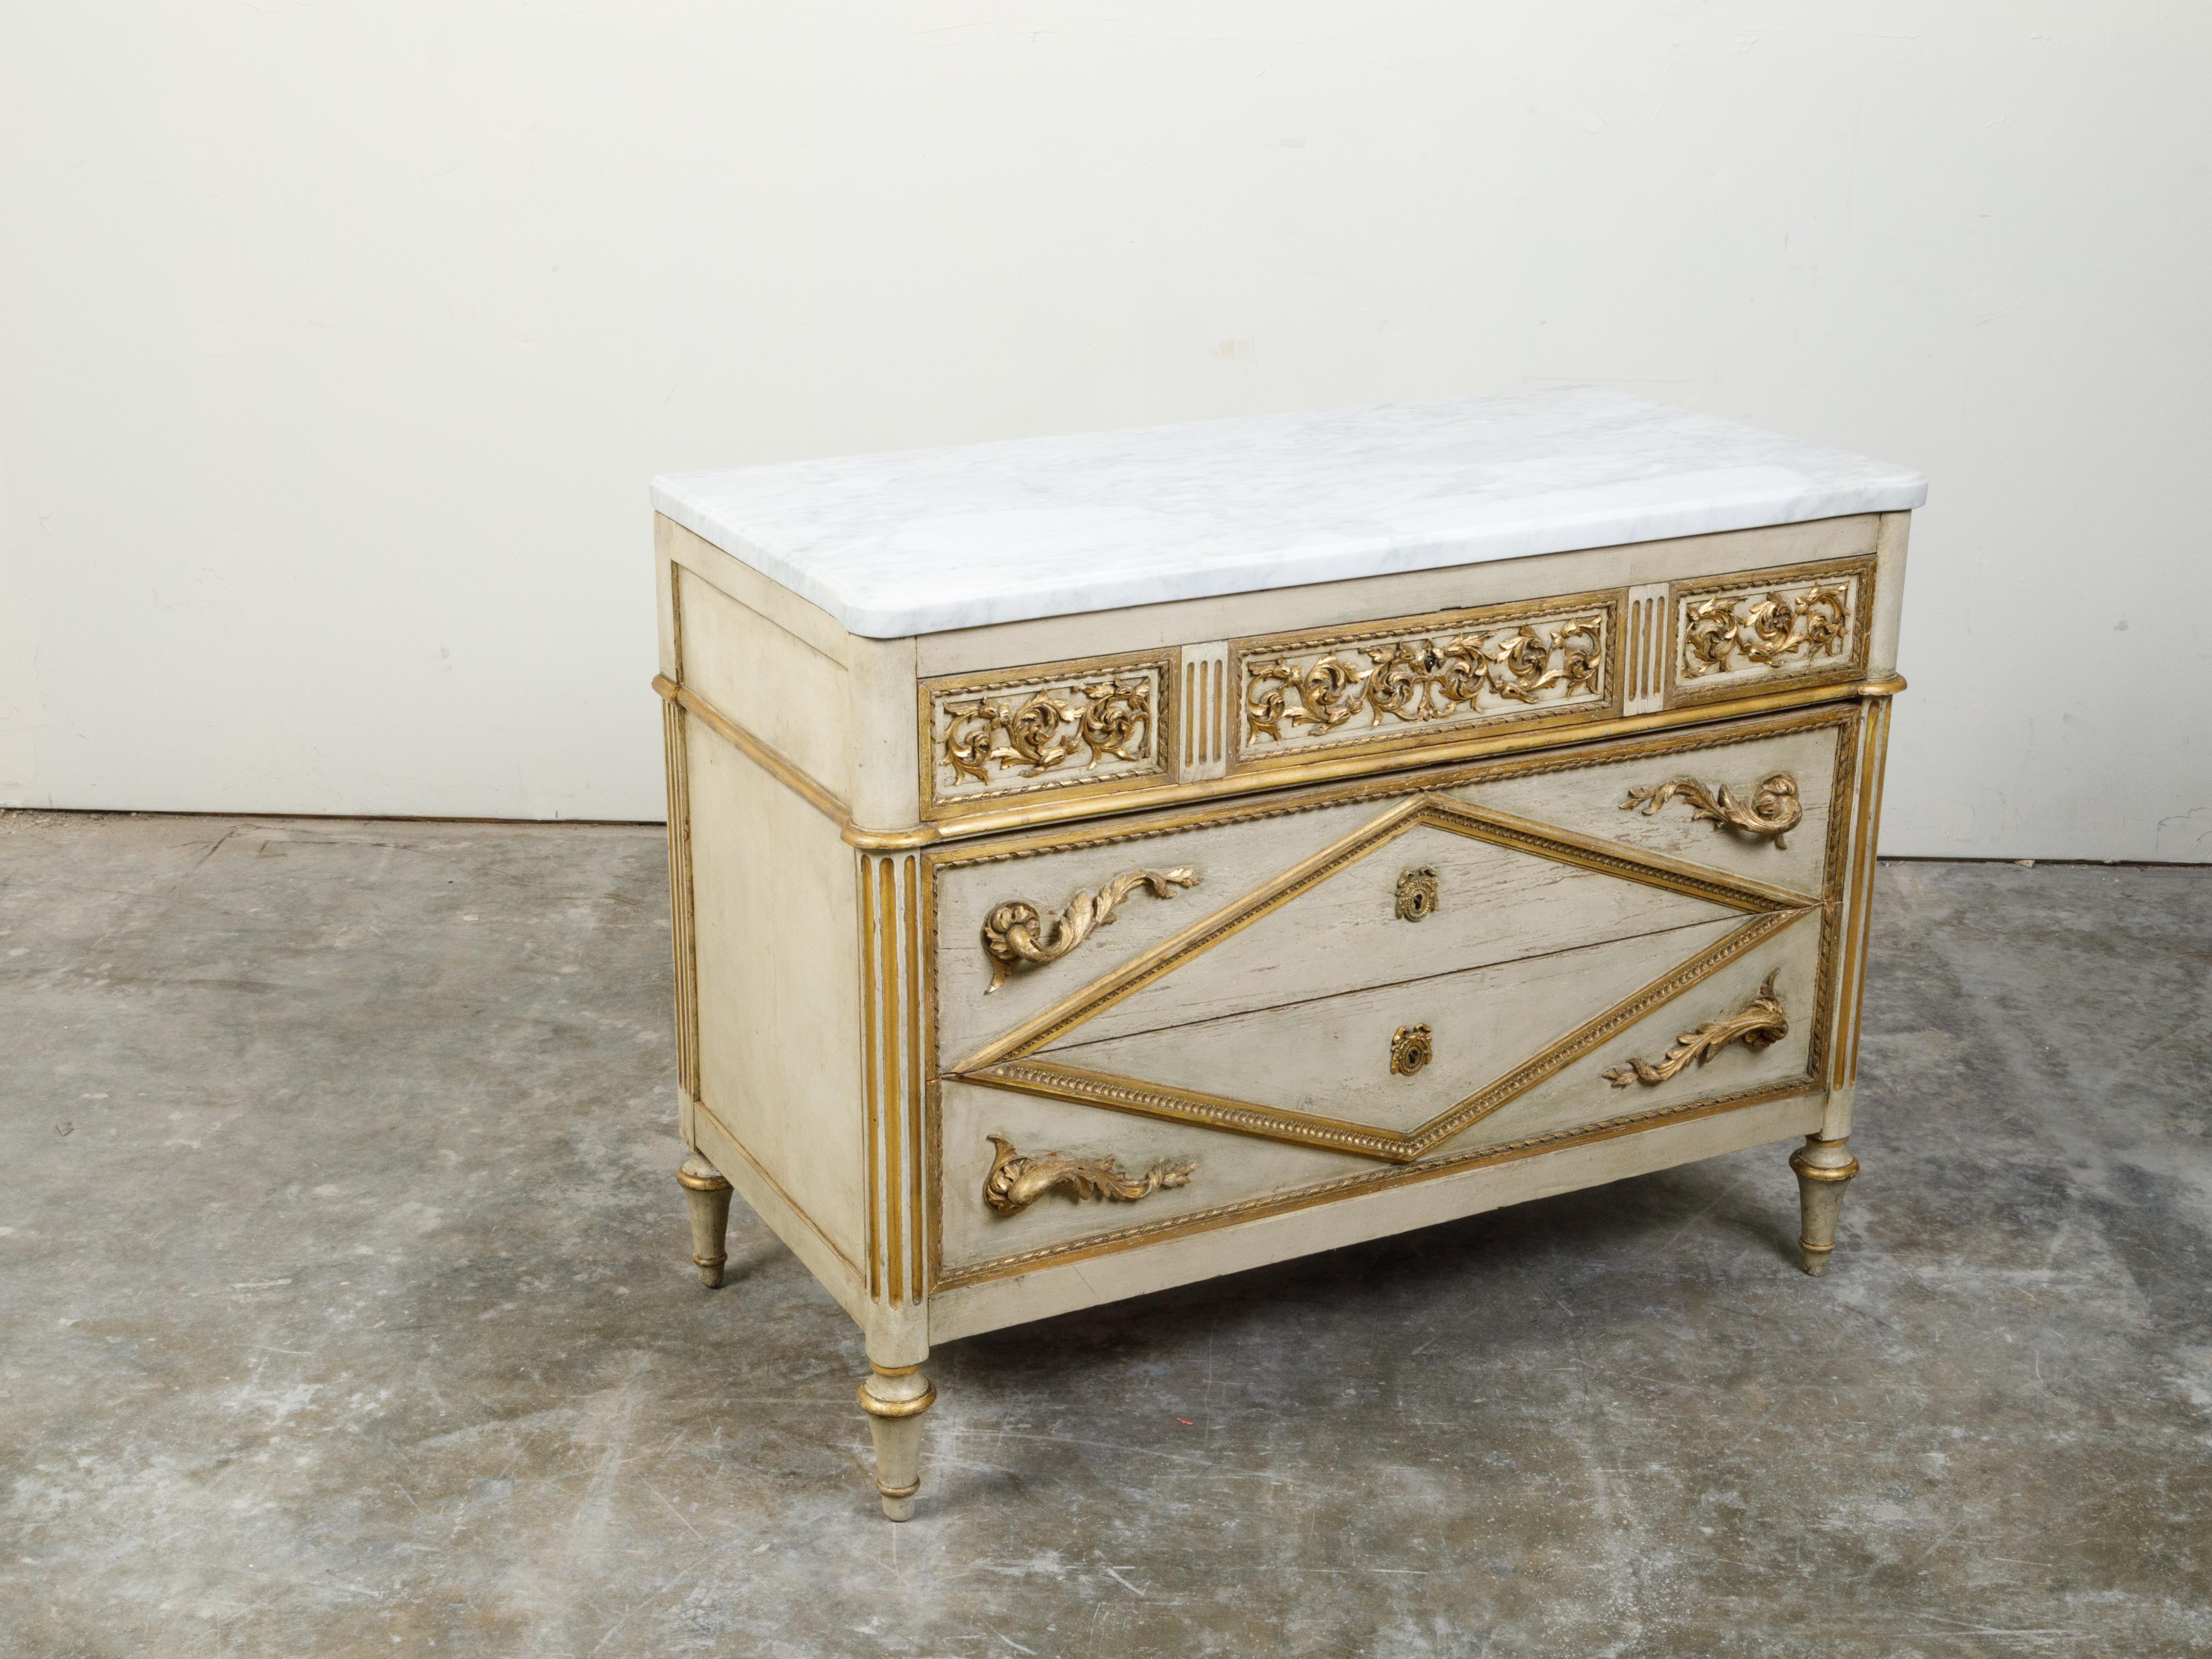 19th Century Italian Neoclassical 1800s Three-Drawer Commode with Gilt and Carved Motifs For Sale